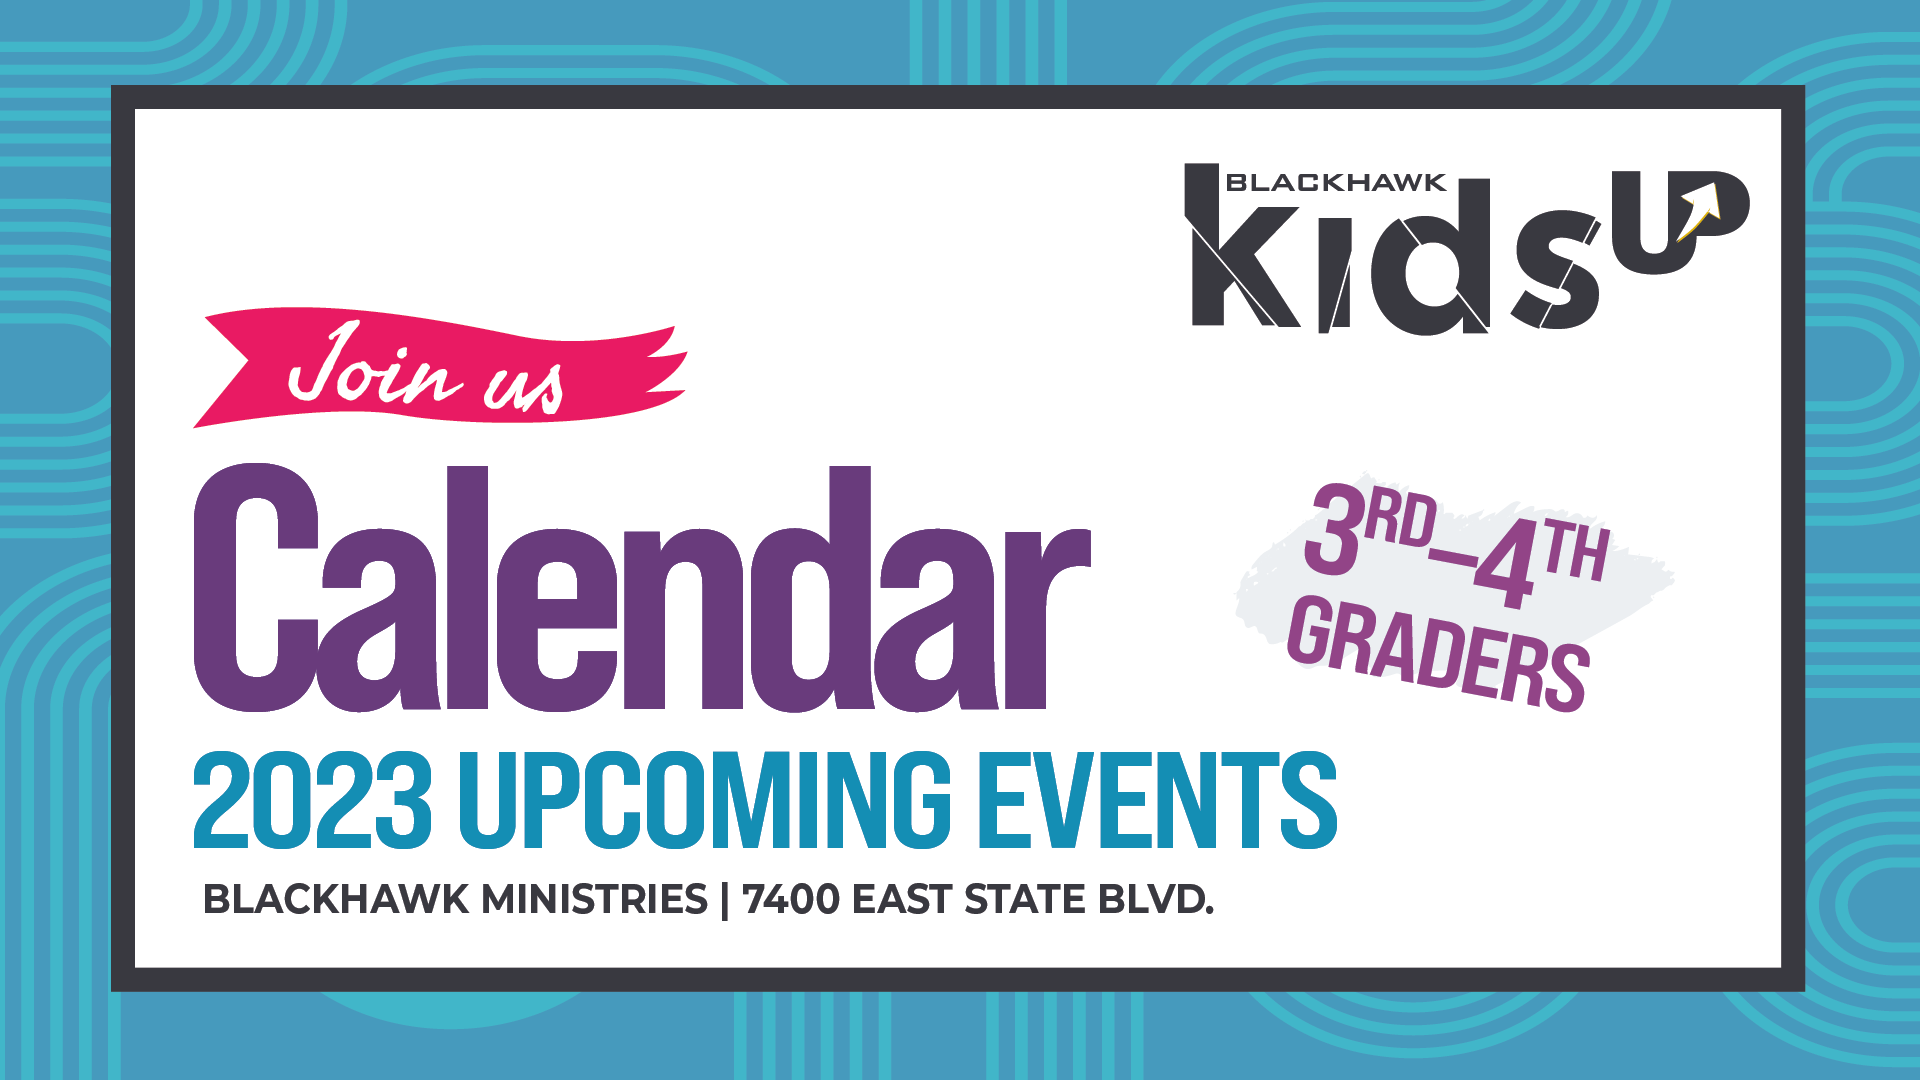 KidsUP UPcoming Events!